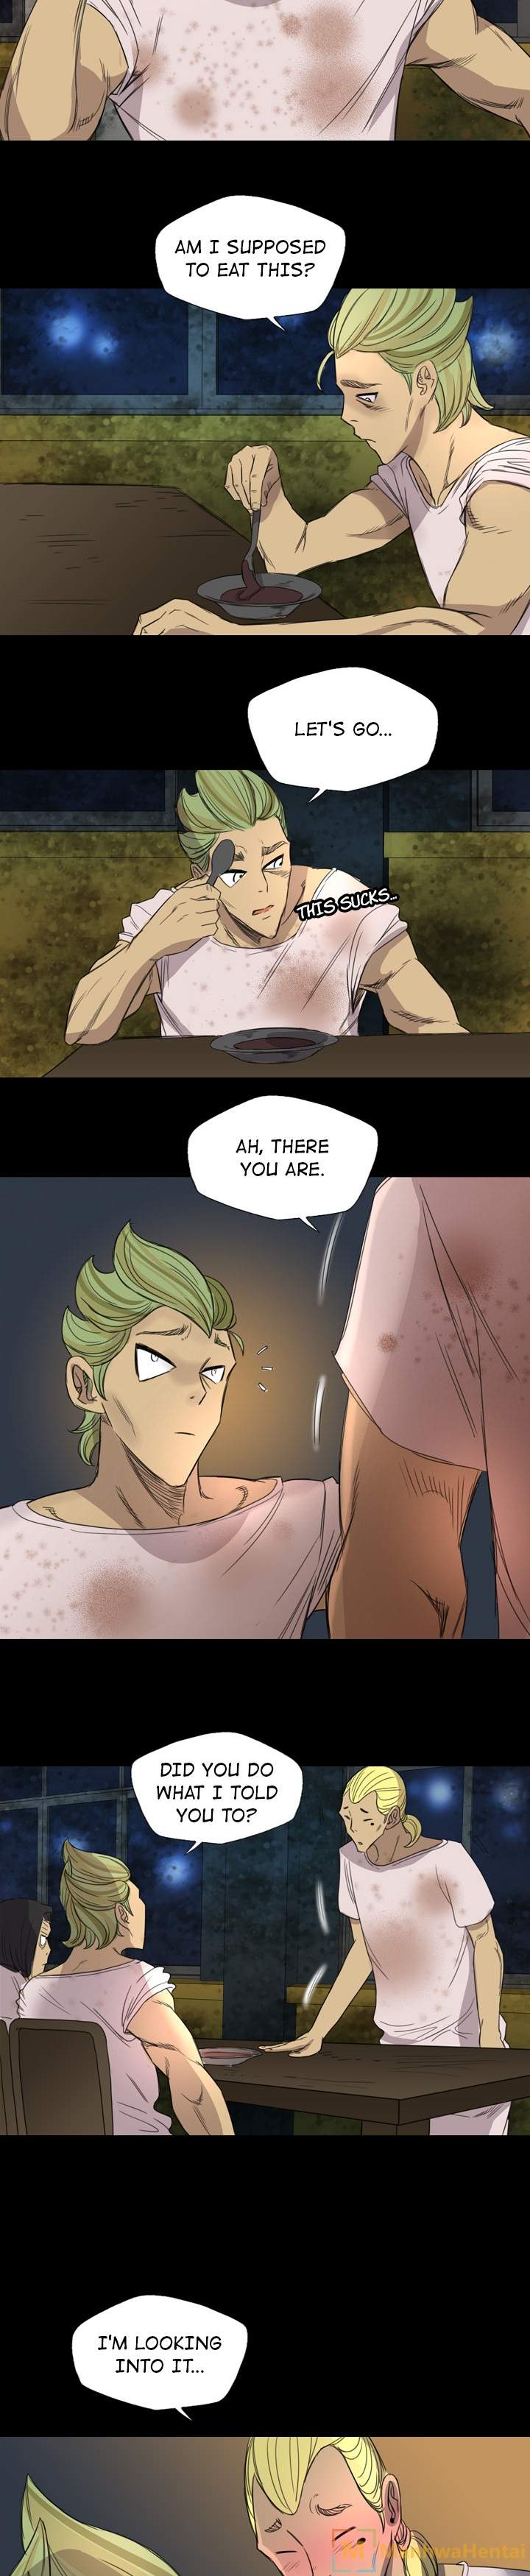 Prison Island Chapter 5 - Page 3